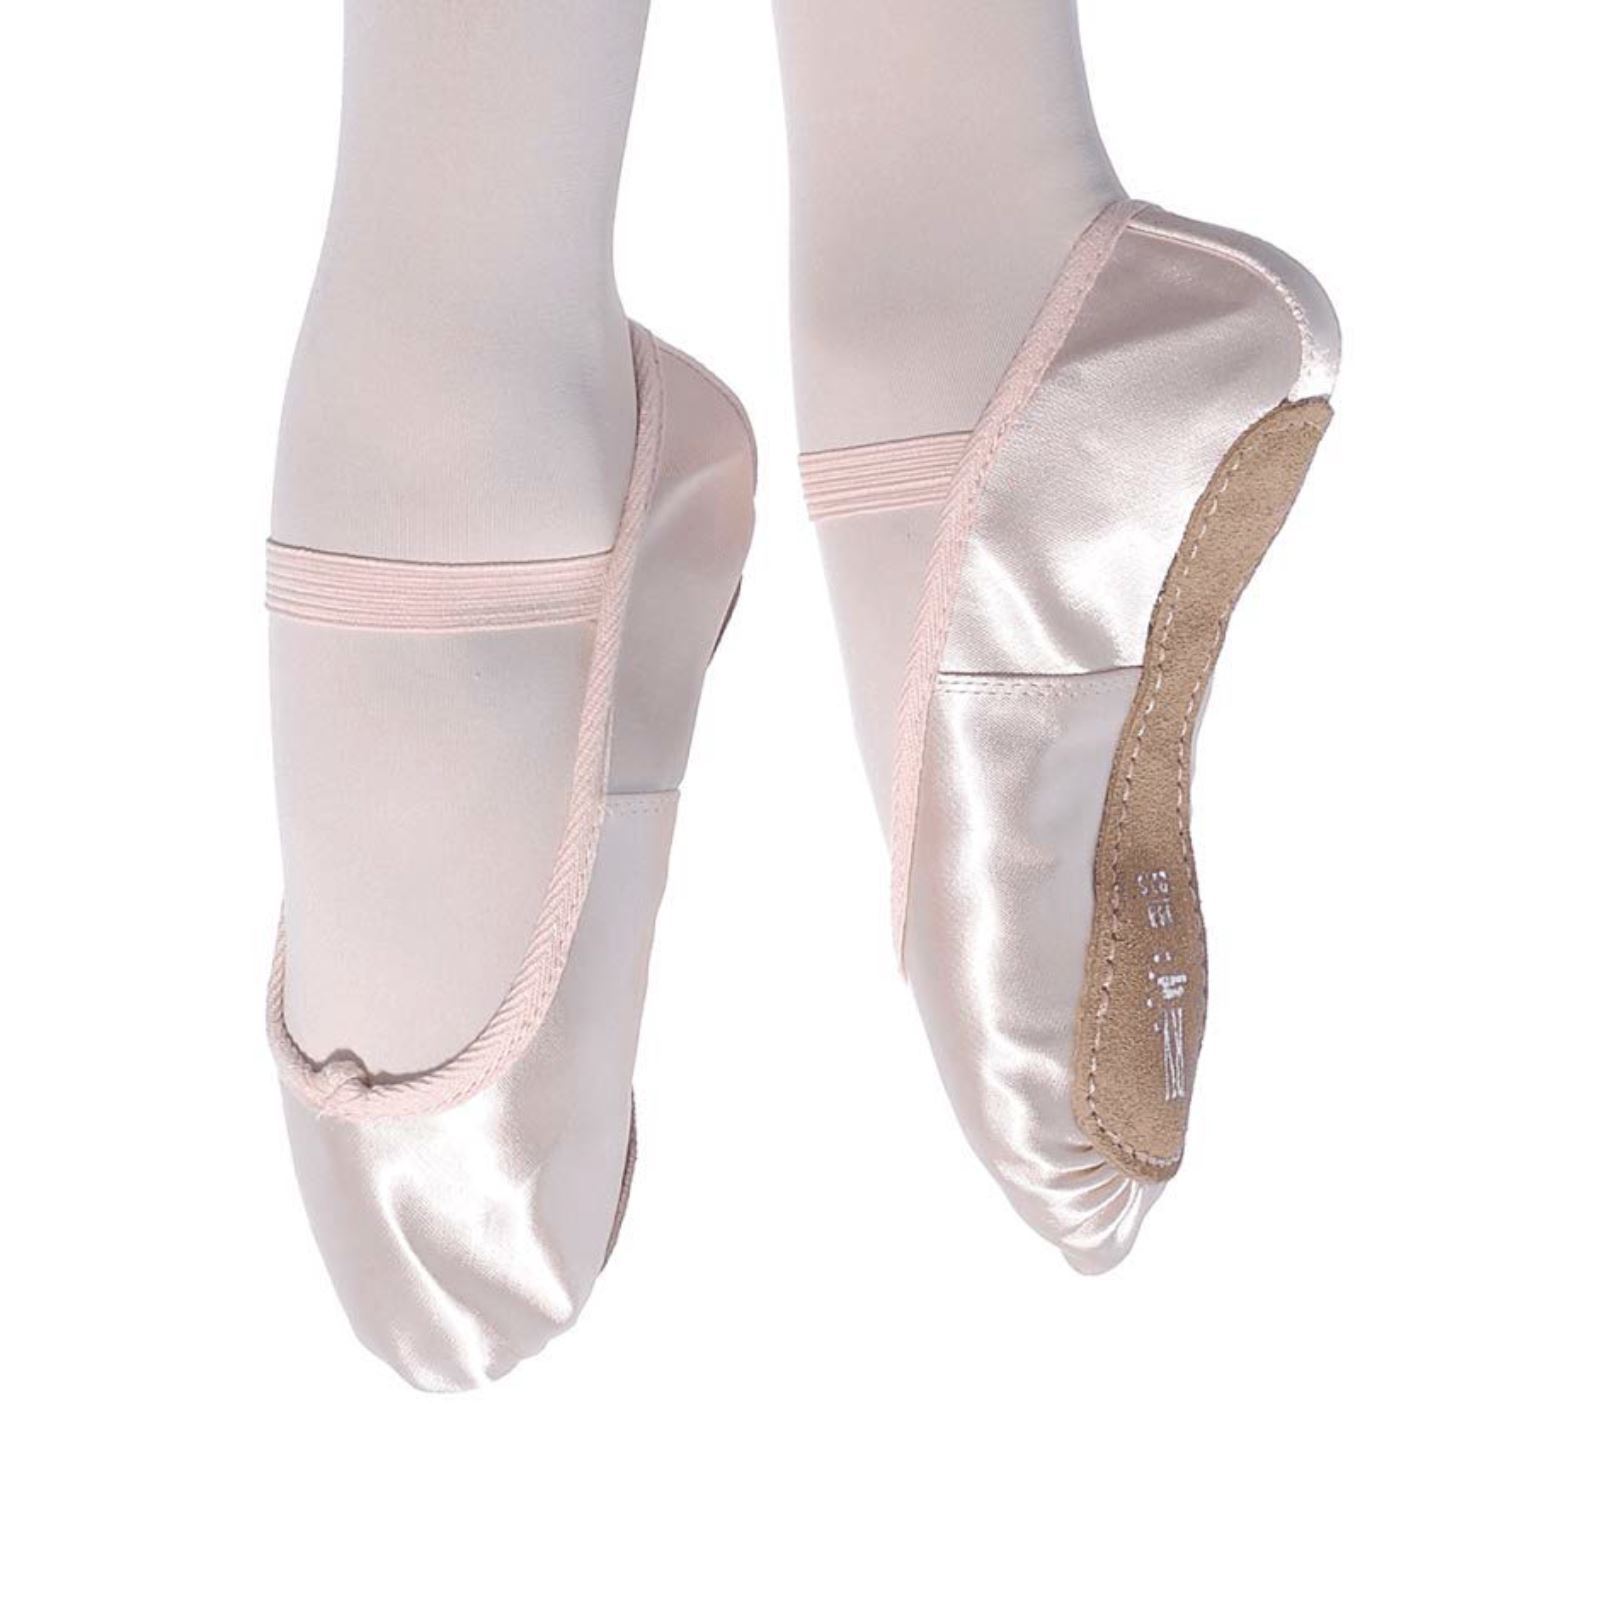 roch-valley-premium-pink-satin-full-sole-ballet-shoes-dance-shoes-roch-valley-905591.jpg